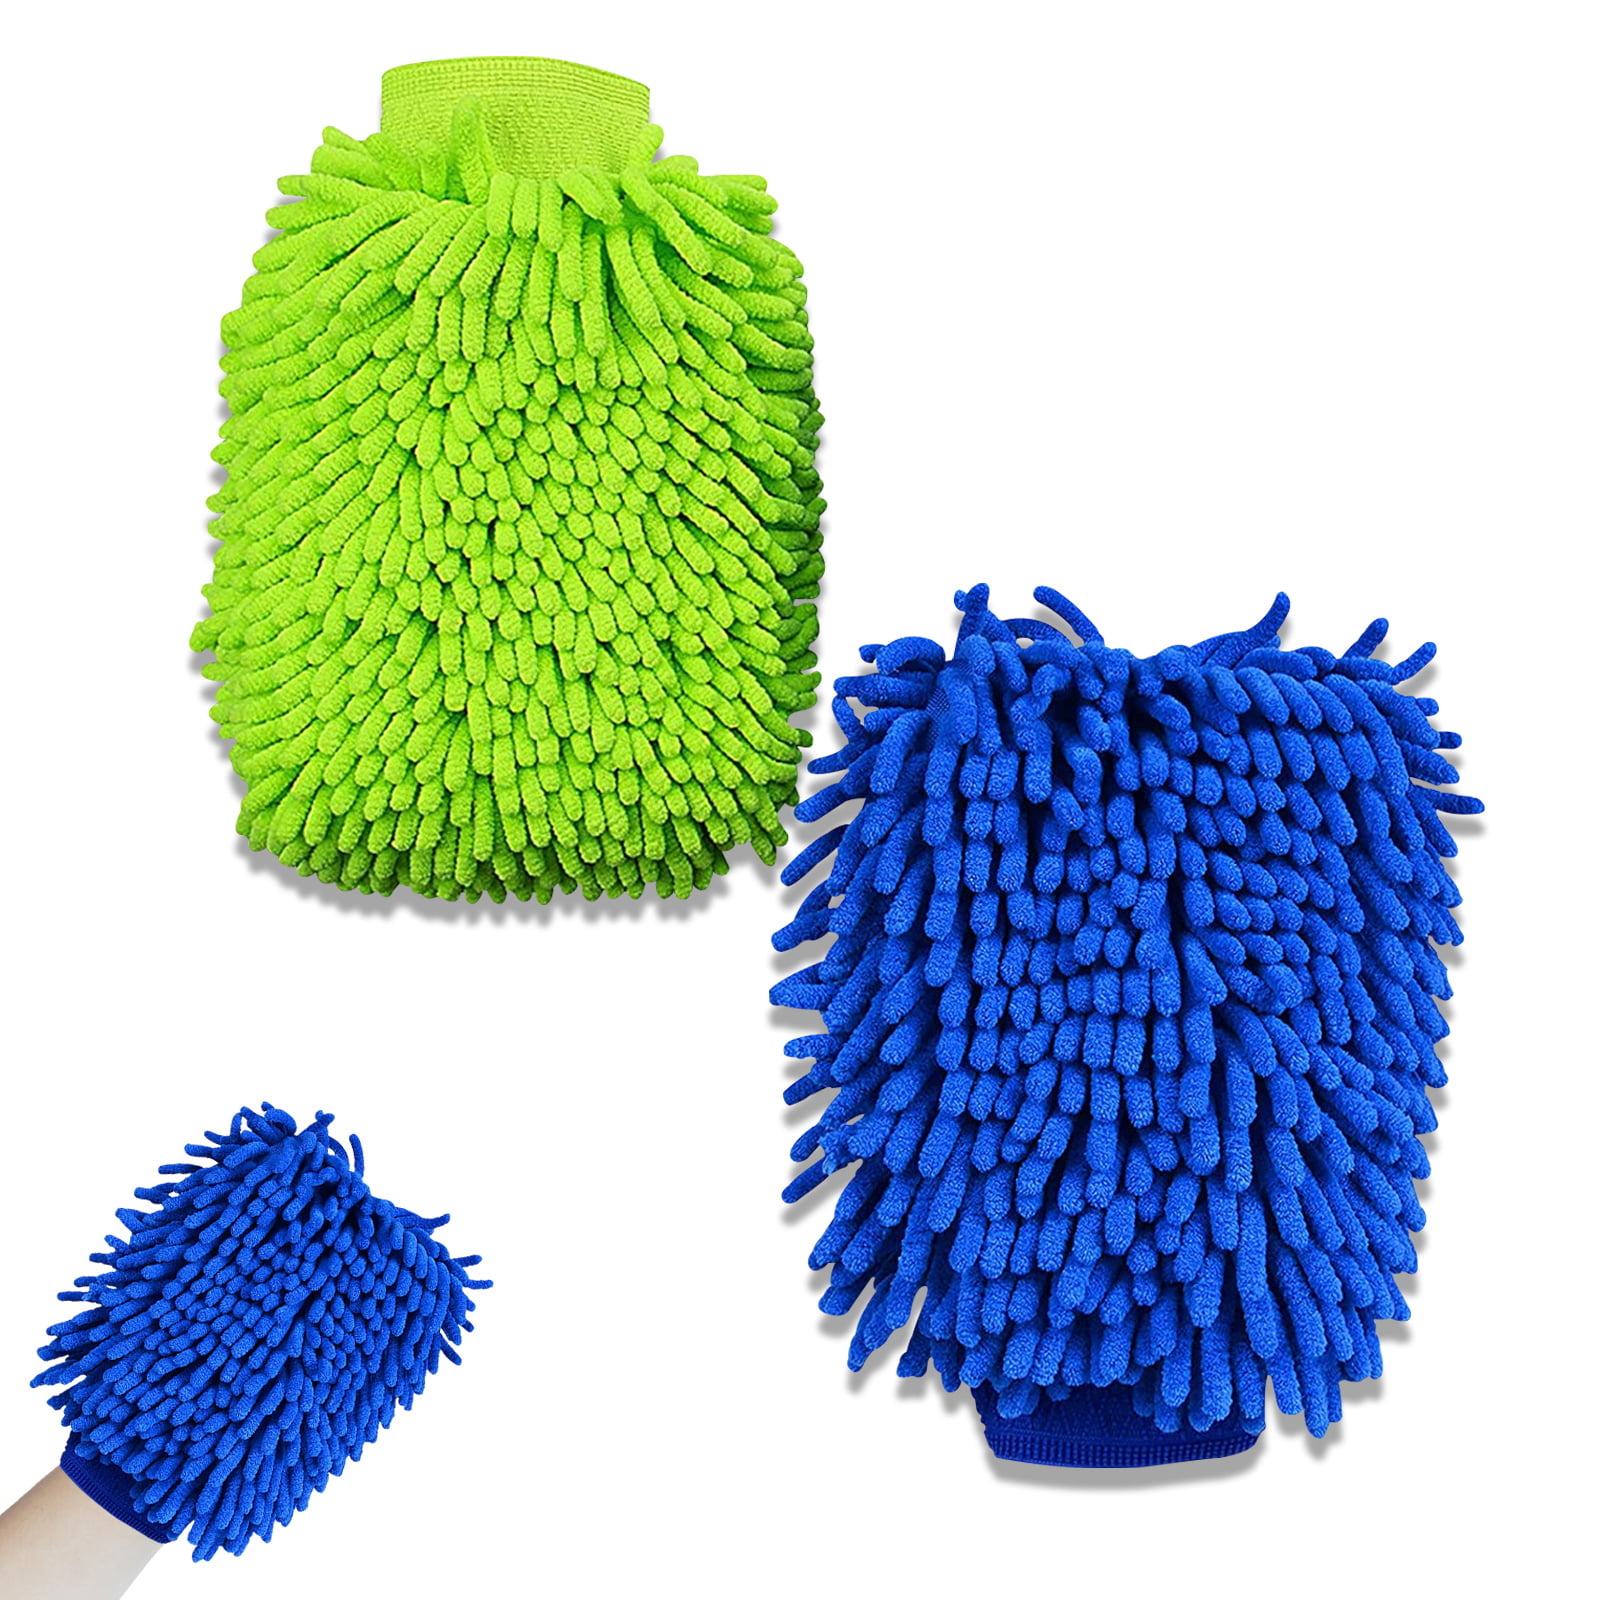 Wash Scratch Free-Green and Buff Extra Large Size Wash Glove Lint Free WeTest Car Care Chenille Wash Mitt 2 Pack for Dust 